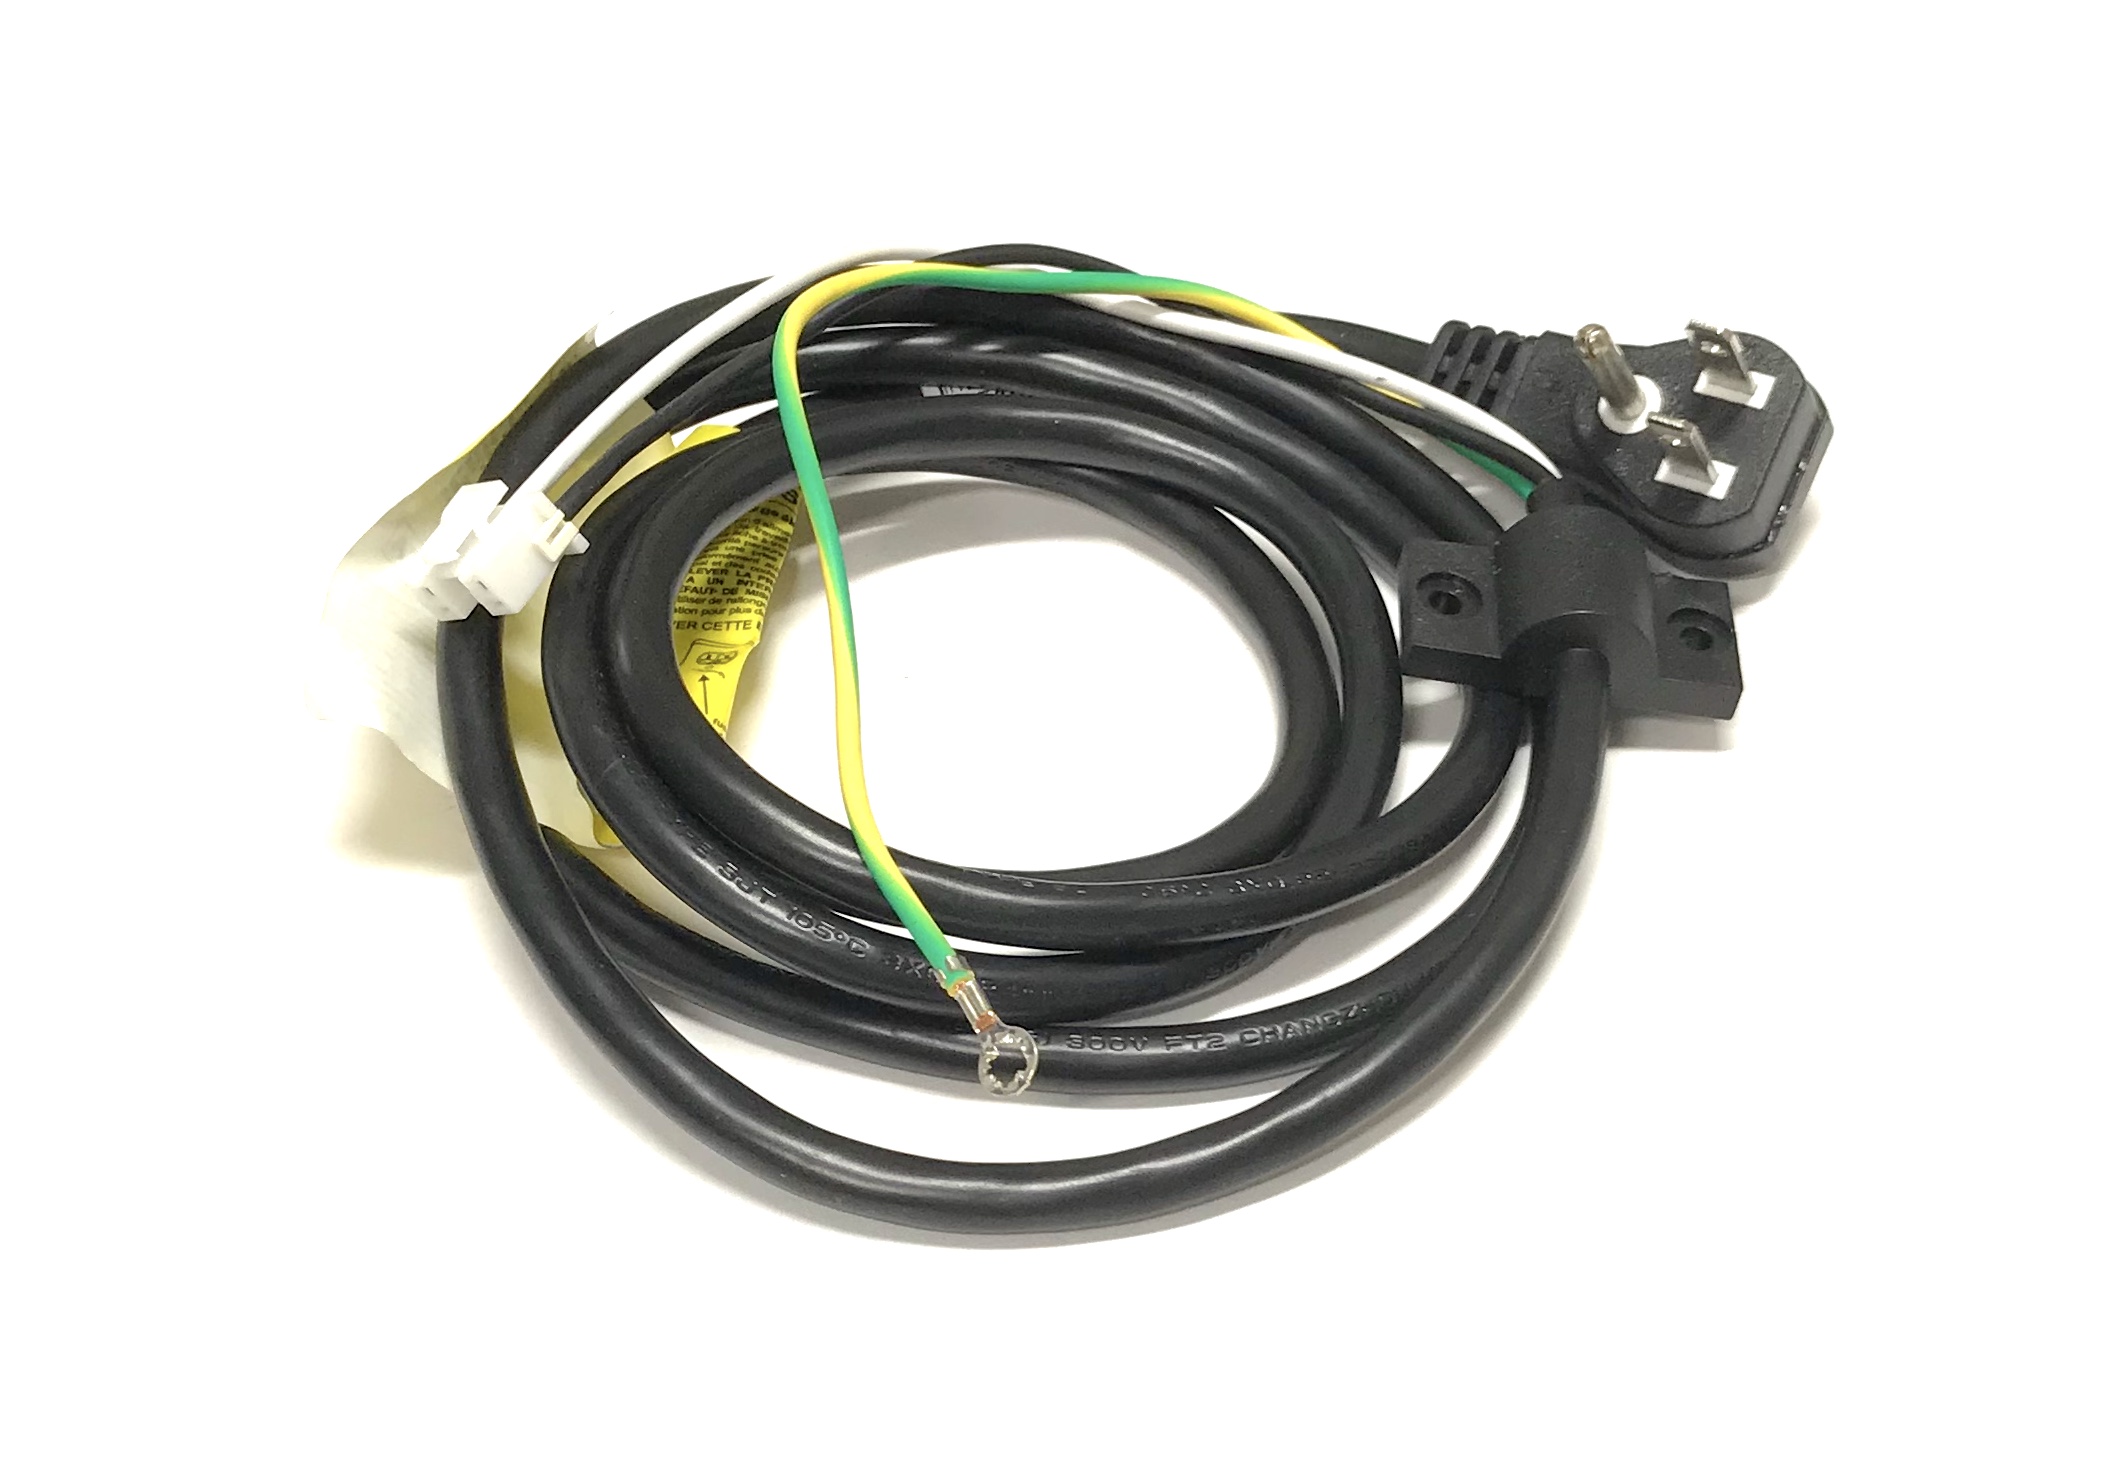 OEM LG Refrigerator Power Cord Cable Originally Shipped With LFC22770SW, LDCS24223W - image 1 of 1